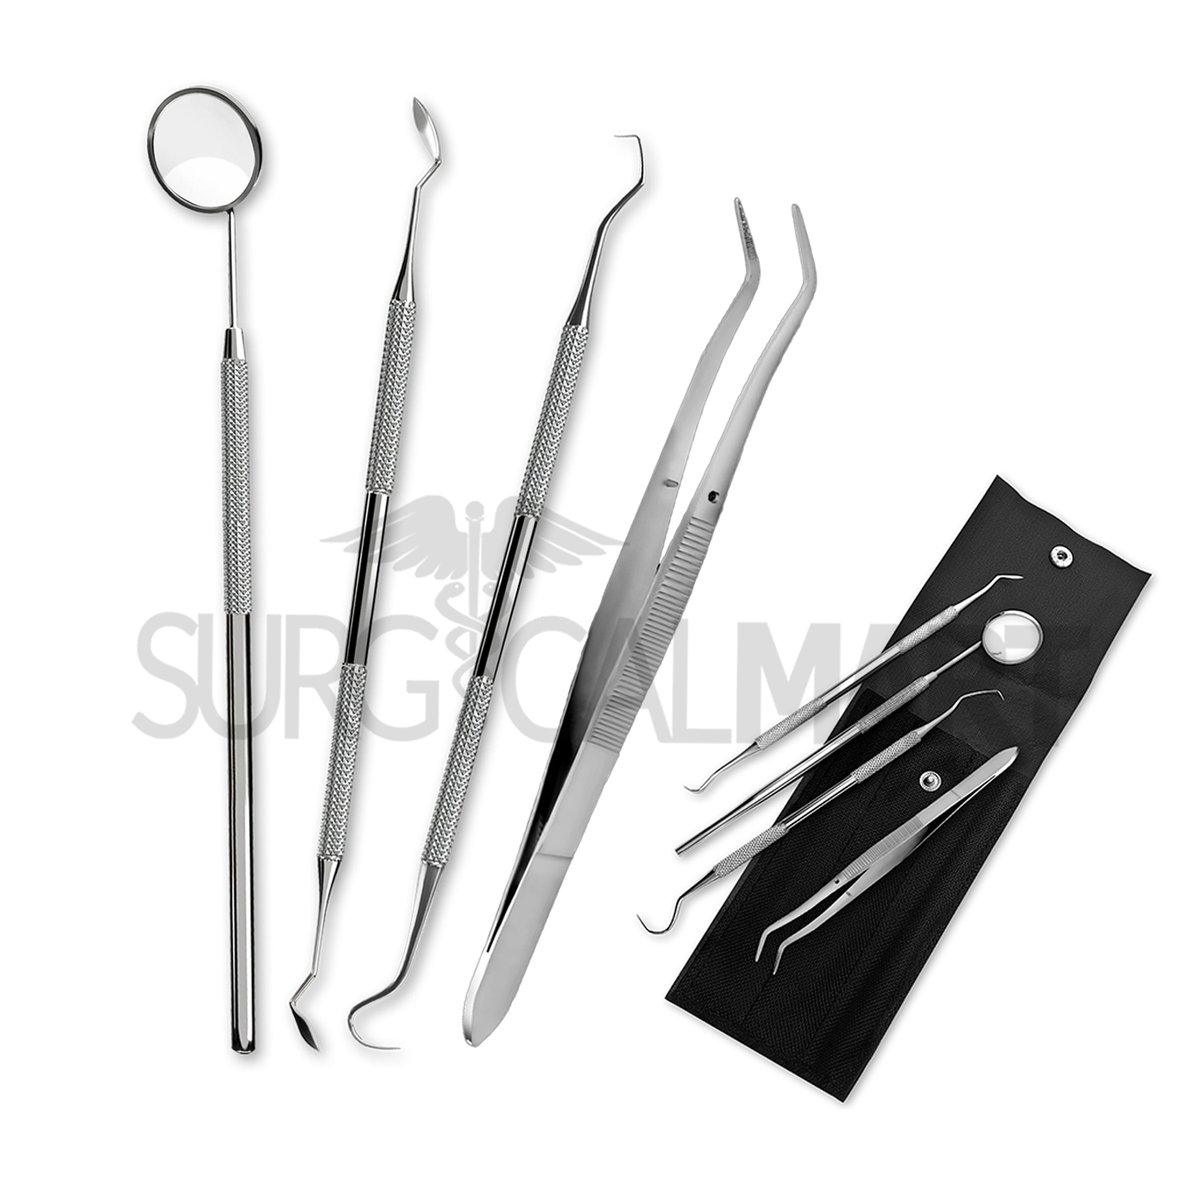 ⚡4 Pcs Professional Dental Pick #Tartar Scraper Tools Set with Pouch for #oralhygiene #teethcleaning kit🦷 SAVE 45% OFF with Free Shipping🚛
Order now 👉 surgicalmart.com/shop/dental-in…
.
.
.

#surgicalmart #dentaltarterscrapertools #dentaltools #dentalkit #dentalcleaning #shoponline